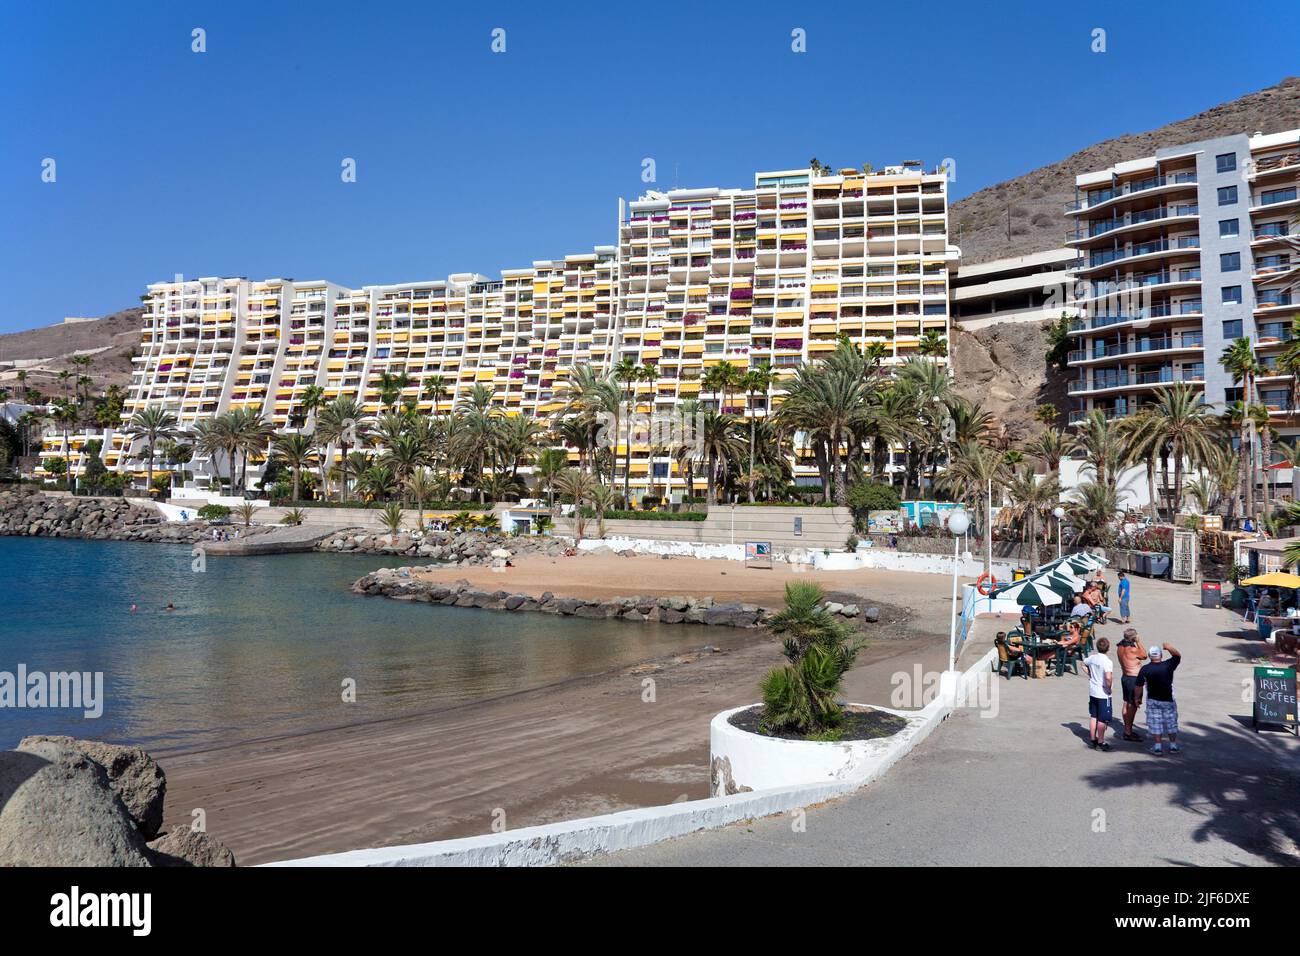 Holiday resort at Anfi del Mar, Arguineguin, Grand Canary, Canary islands, Spain, Europe Stock Photo